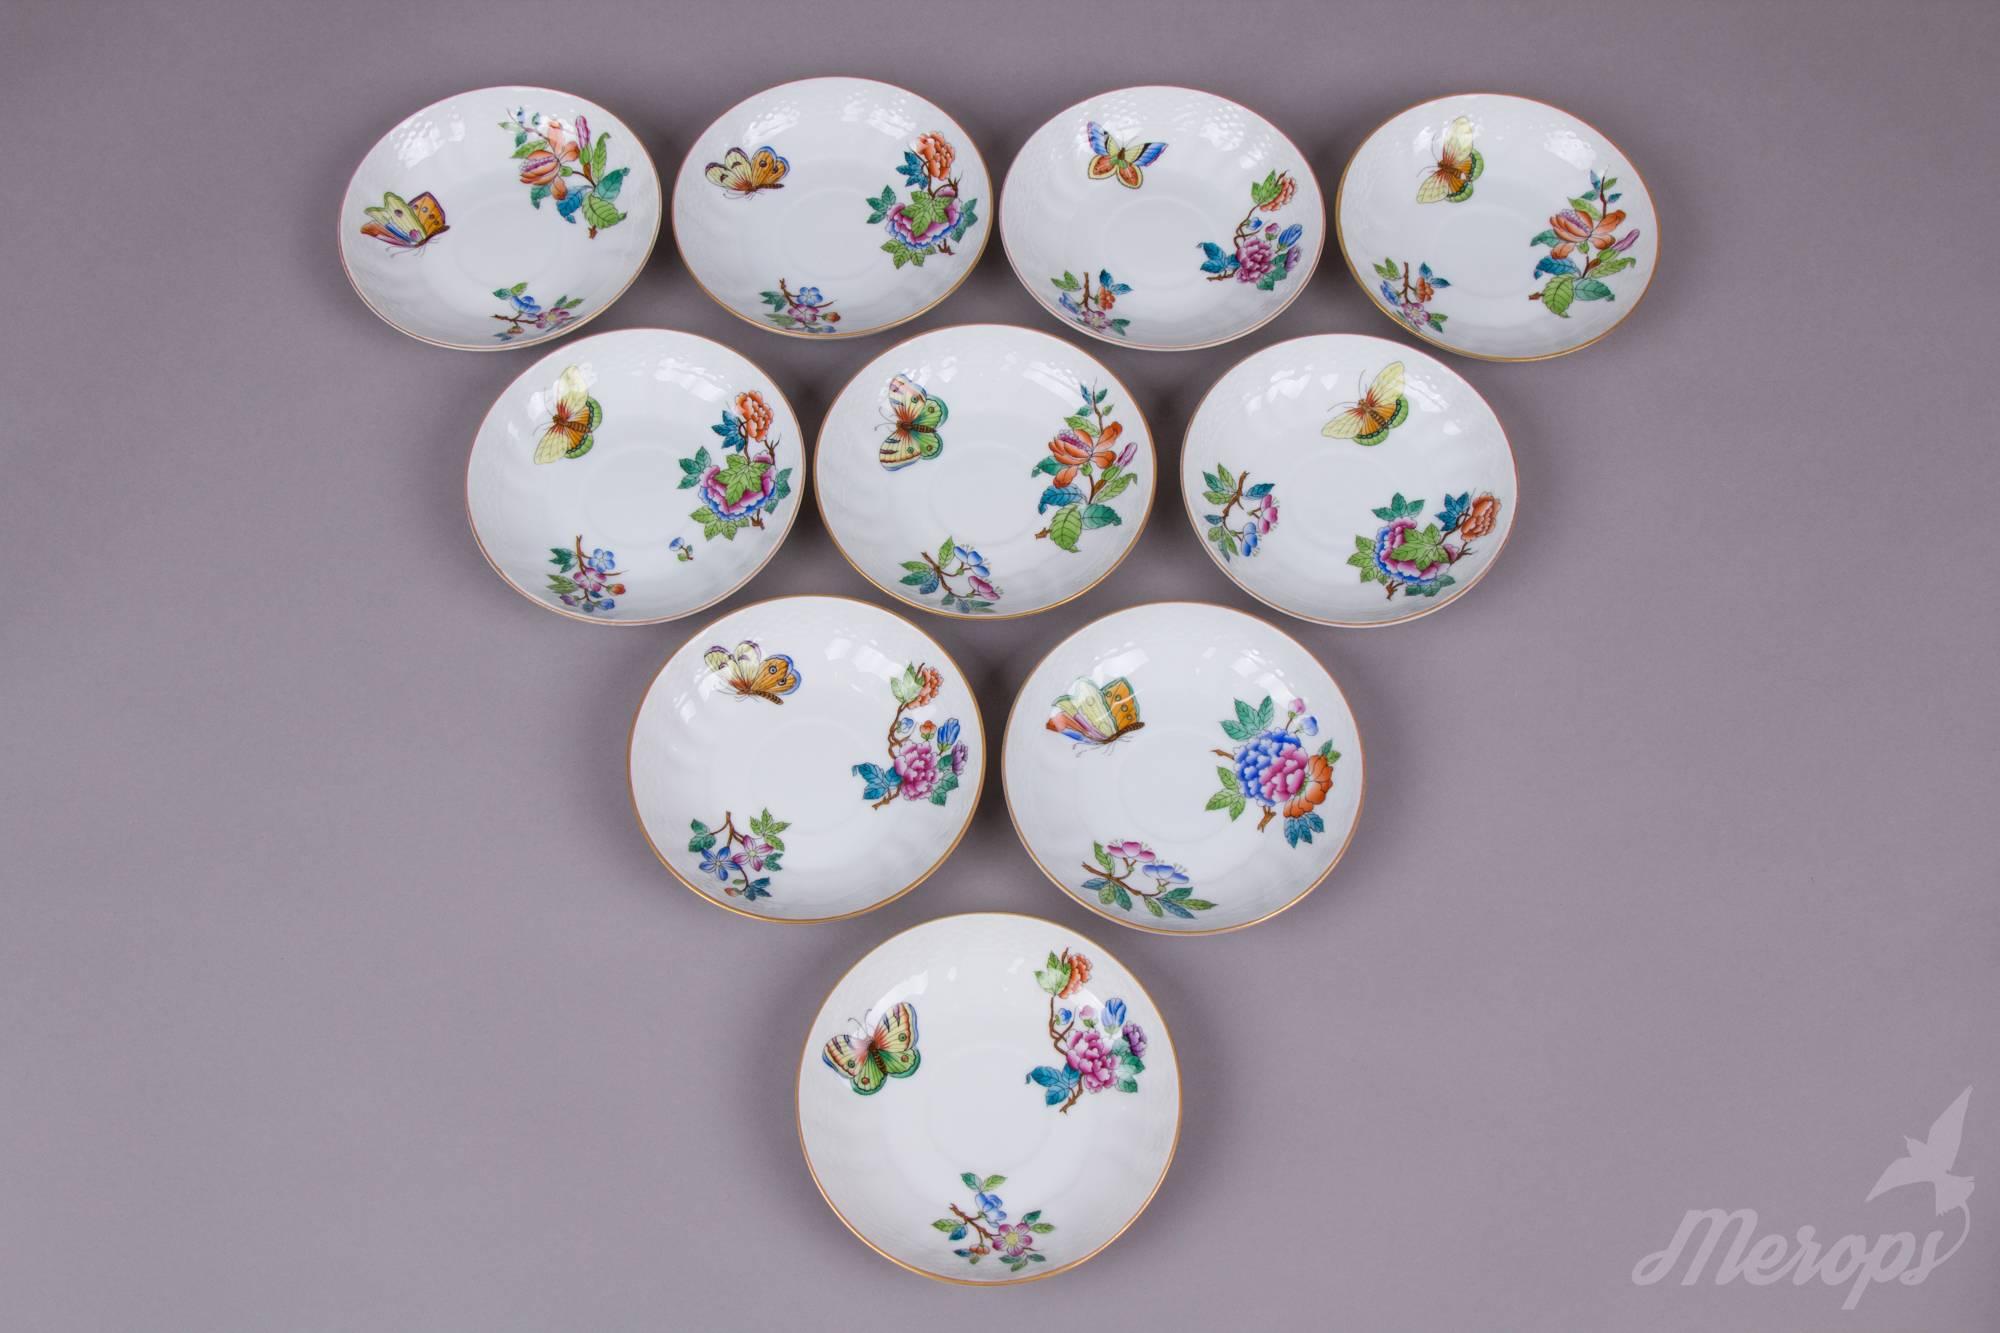 Mid-20th Century Herend Queen Victoria Tea and Dessert Set for Ten Persons, from 1942